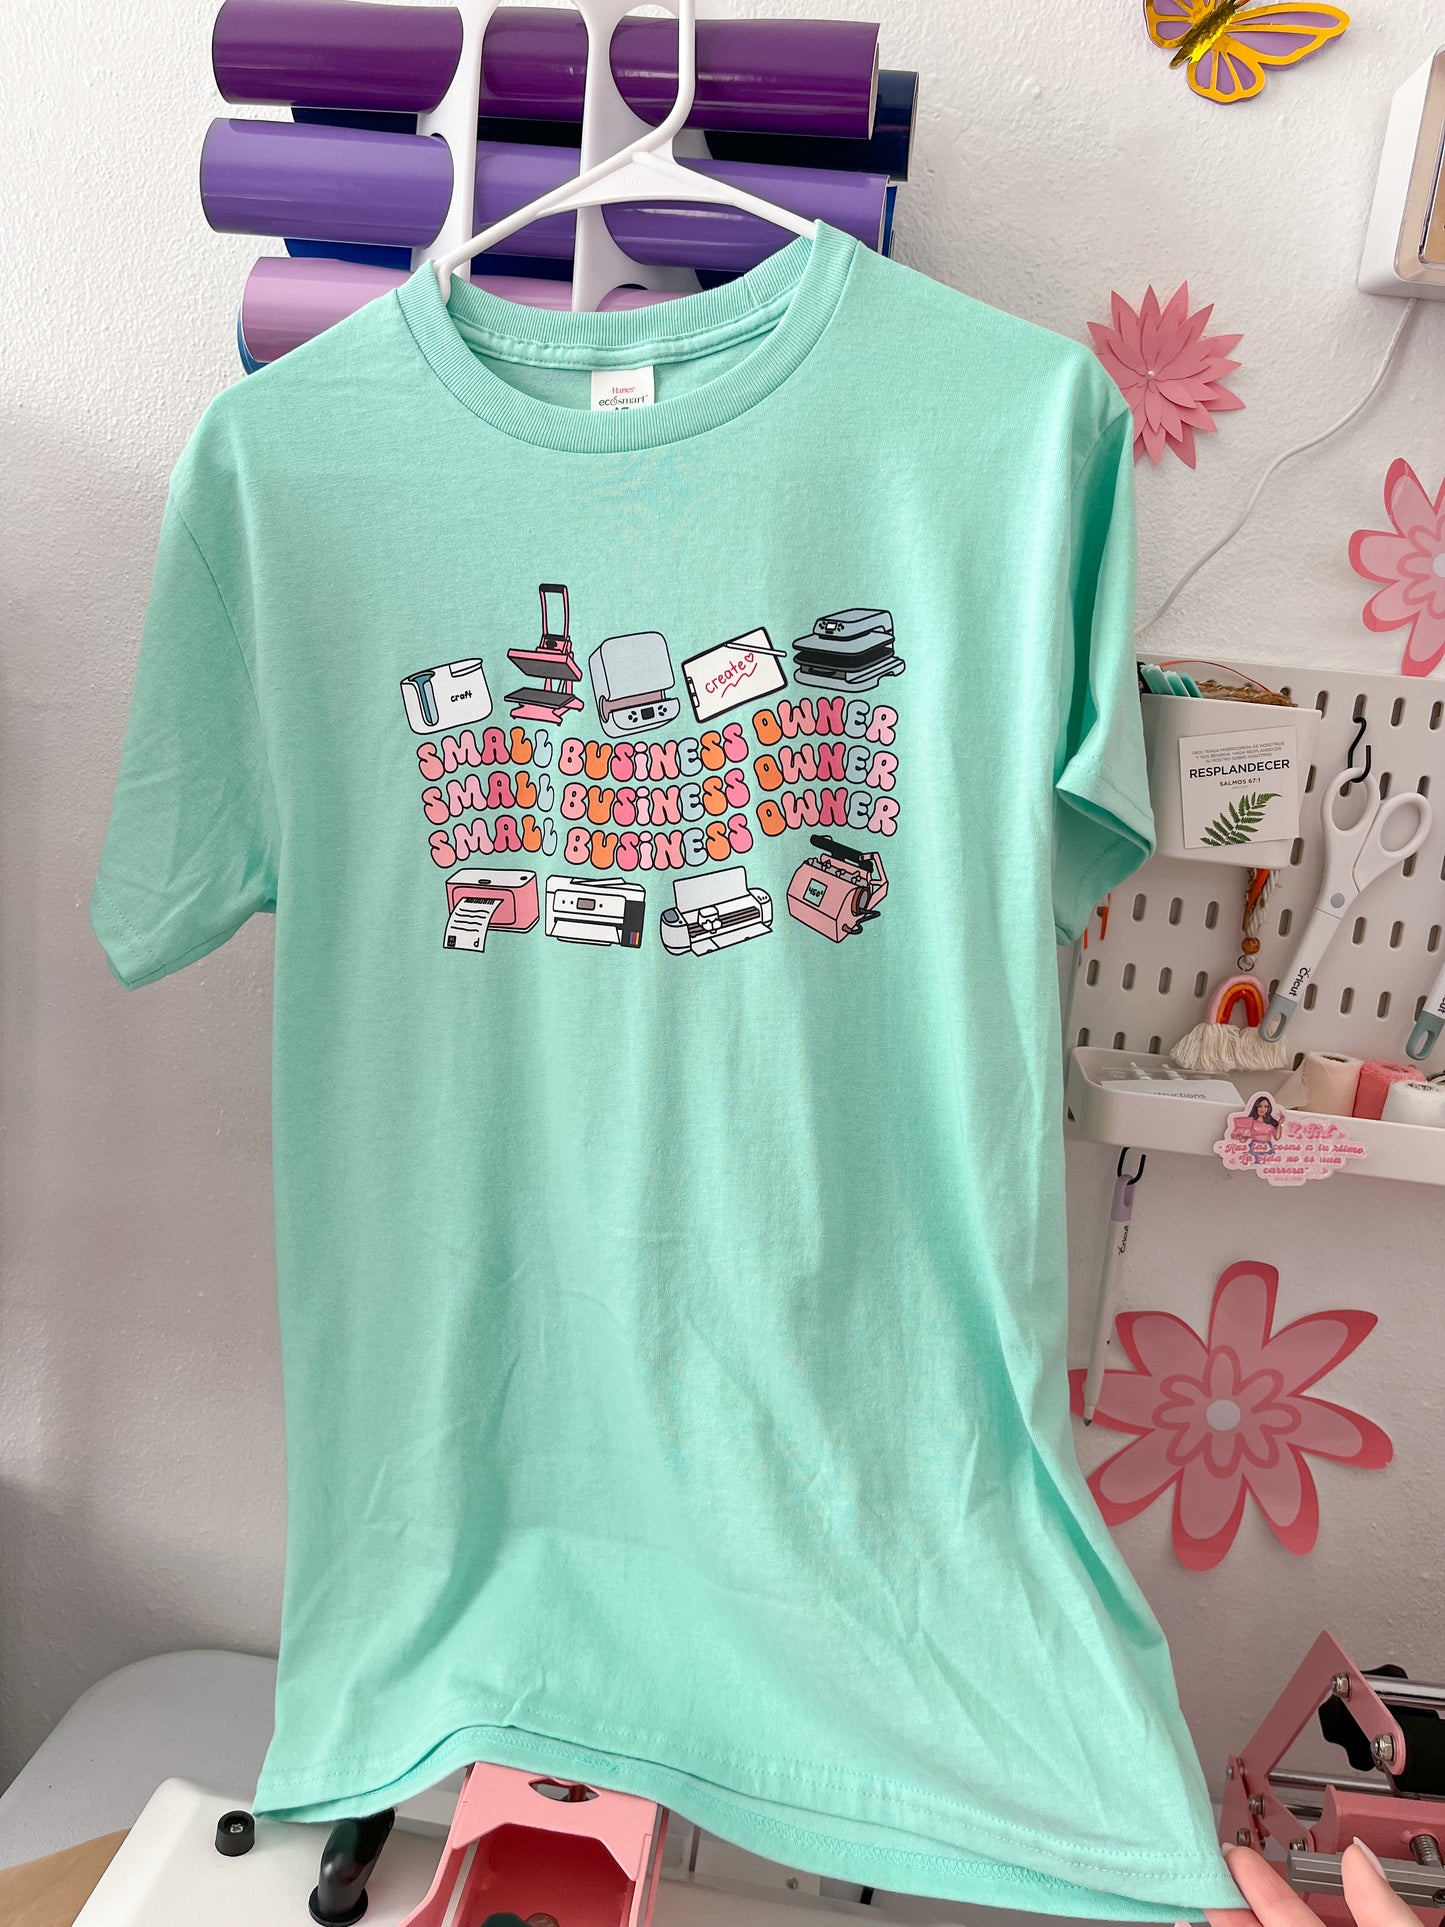 Camisa Small Business Owner (Crafter Edition)